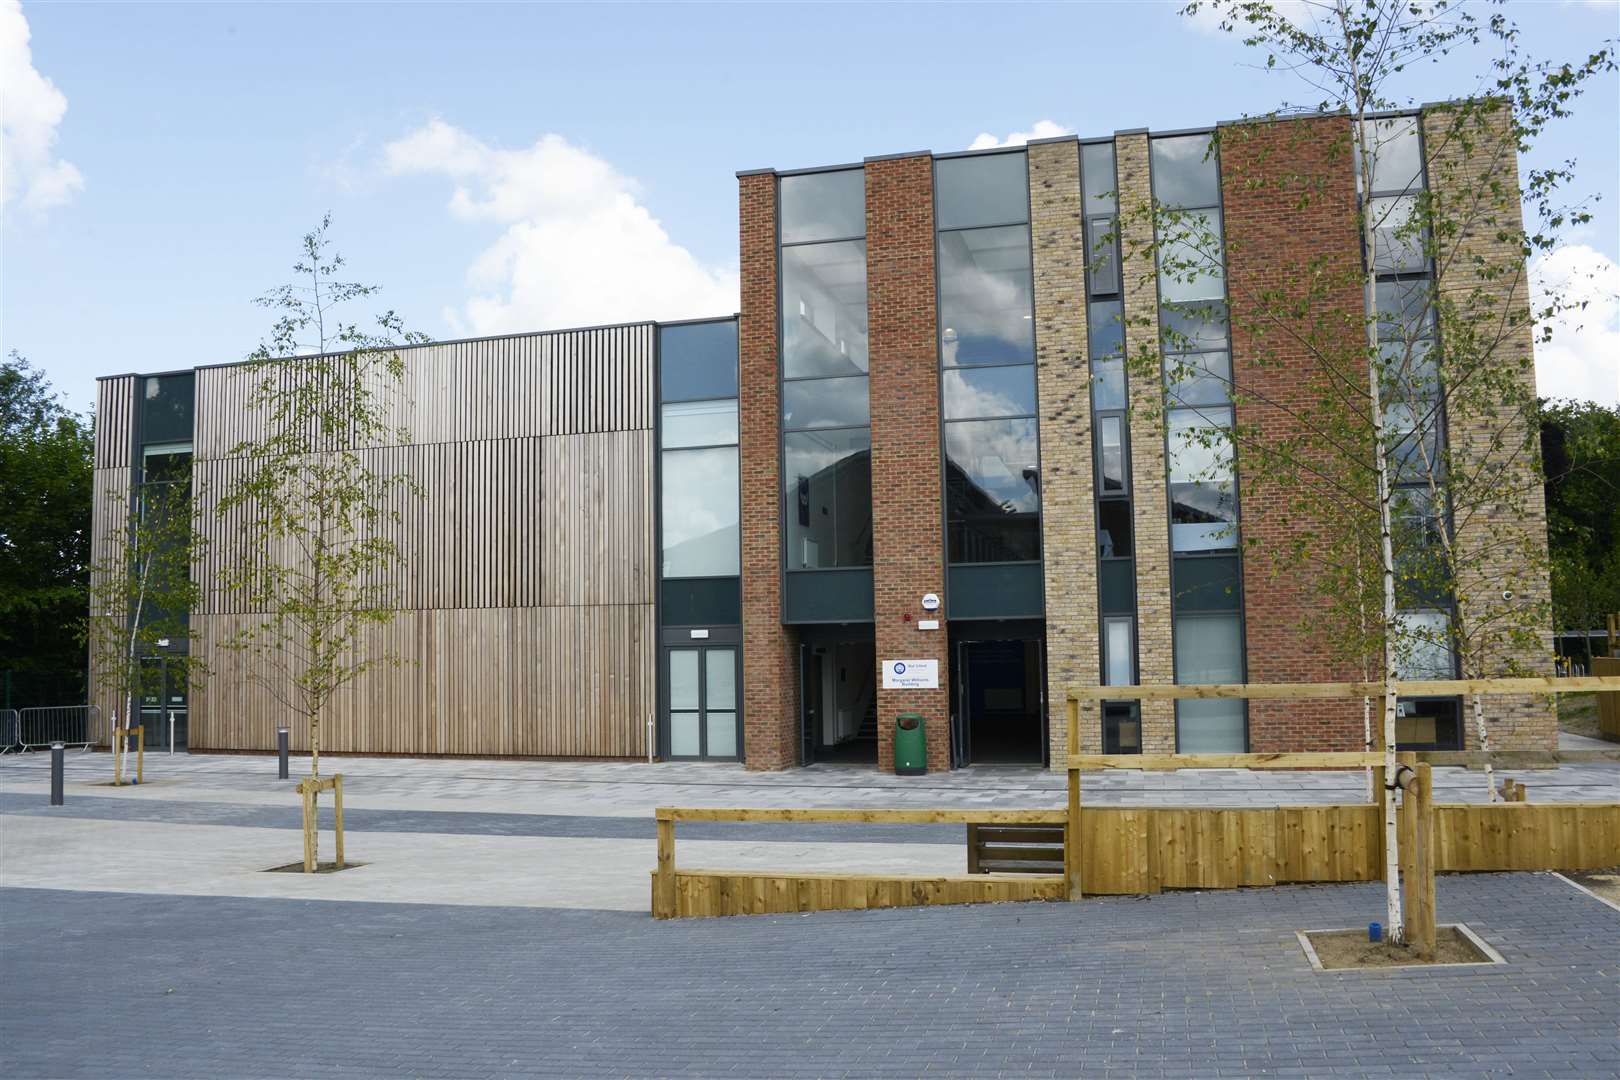 Opened in 2013, the Wye Free School unveiled its new Margaret Williams building last month